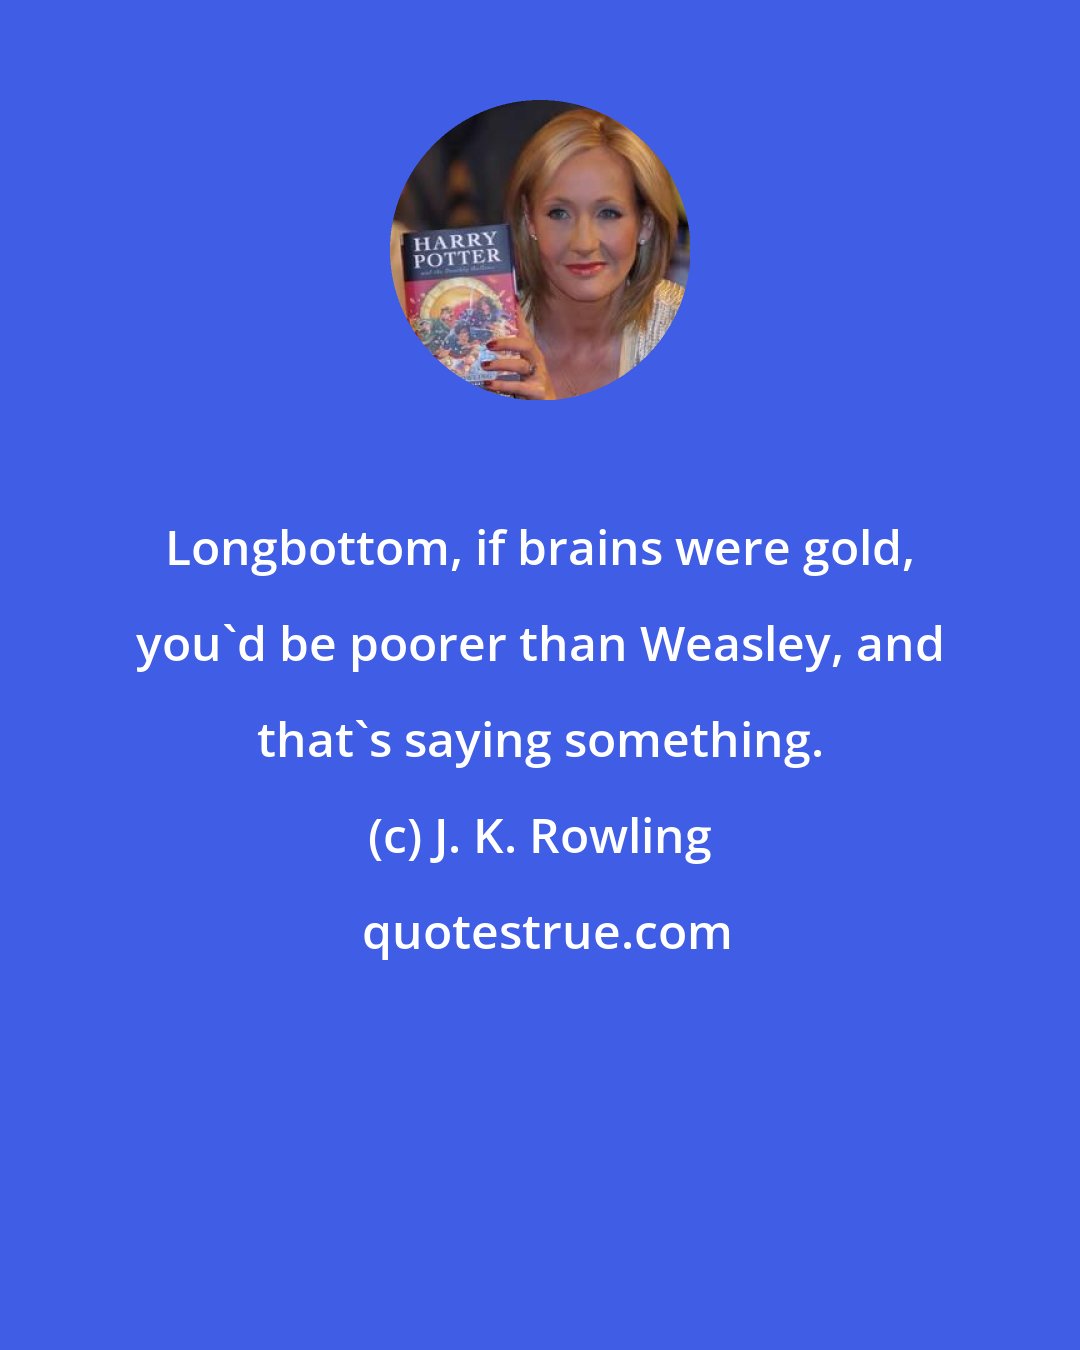 J. K. Rowling: Longbottom, if brains were gold, you'd be poorer than Weasley, and that's saying something.